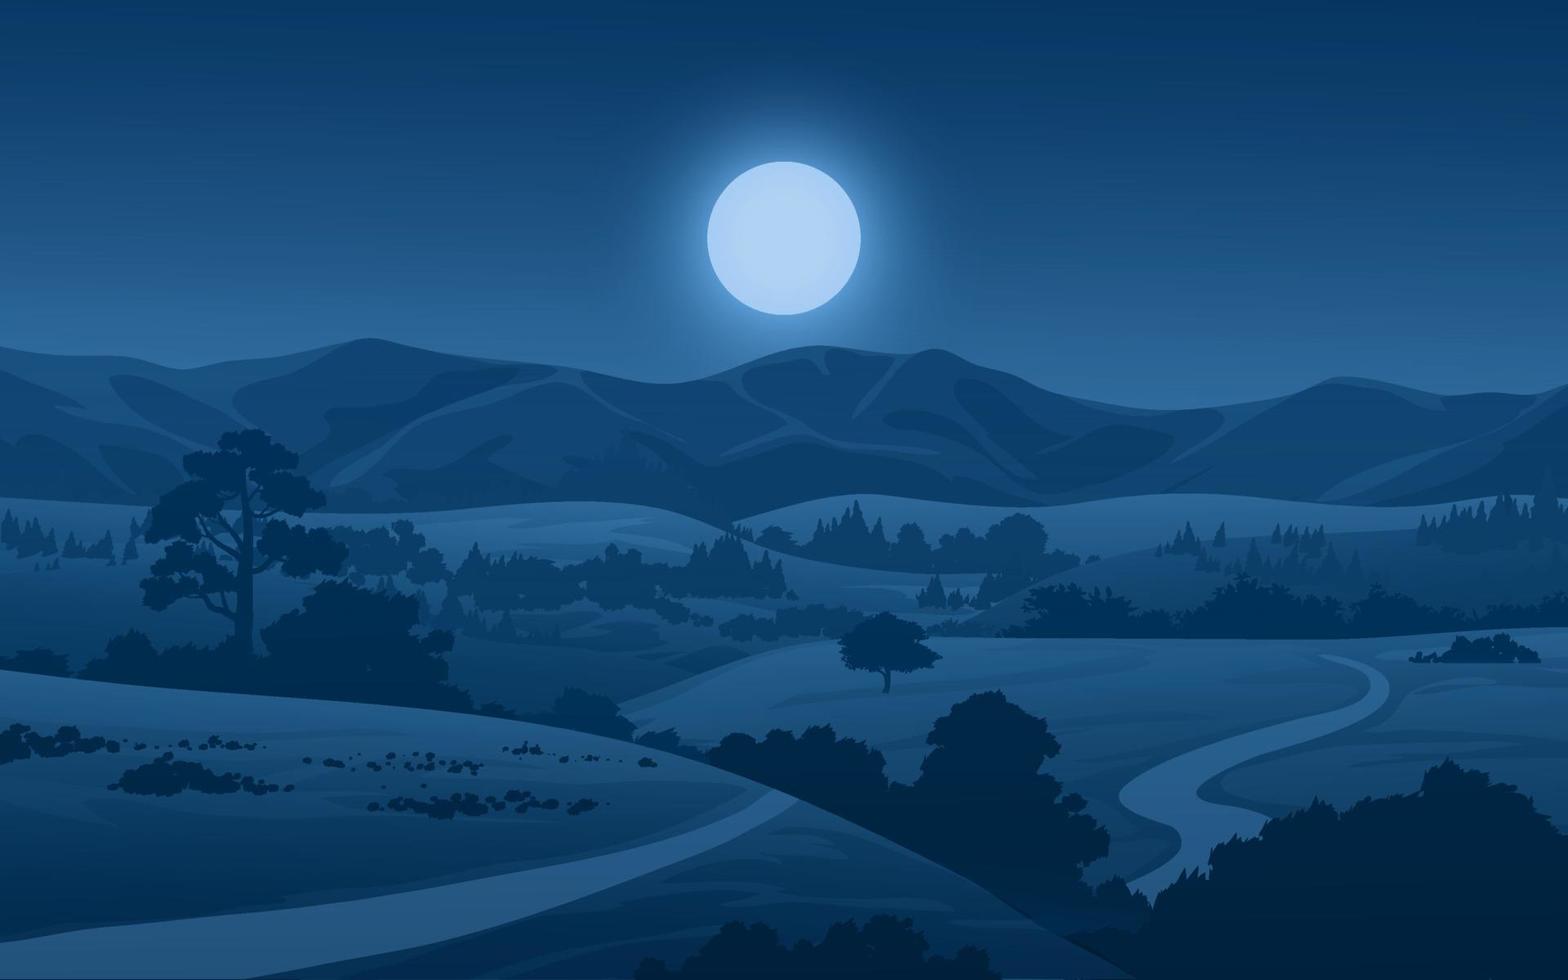 Countryside night scene landscape with full moon vector